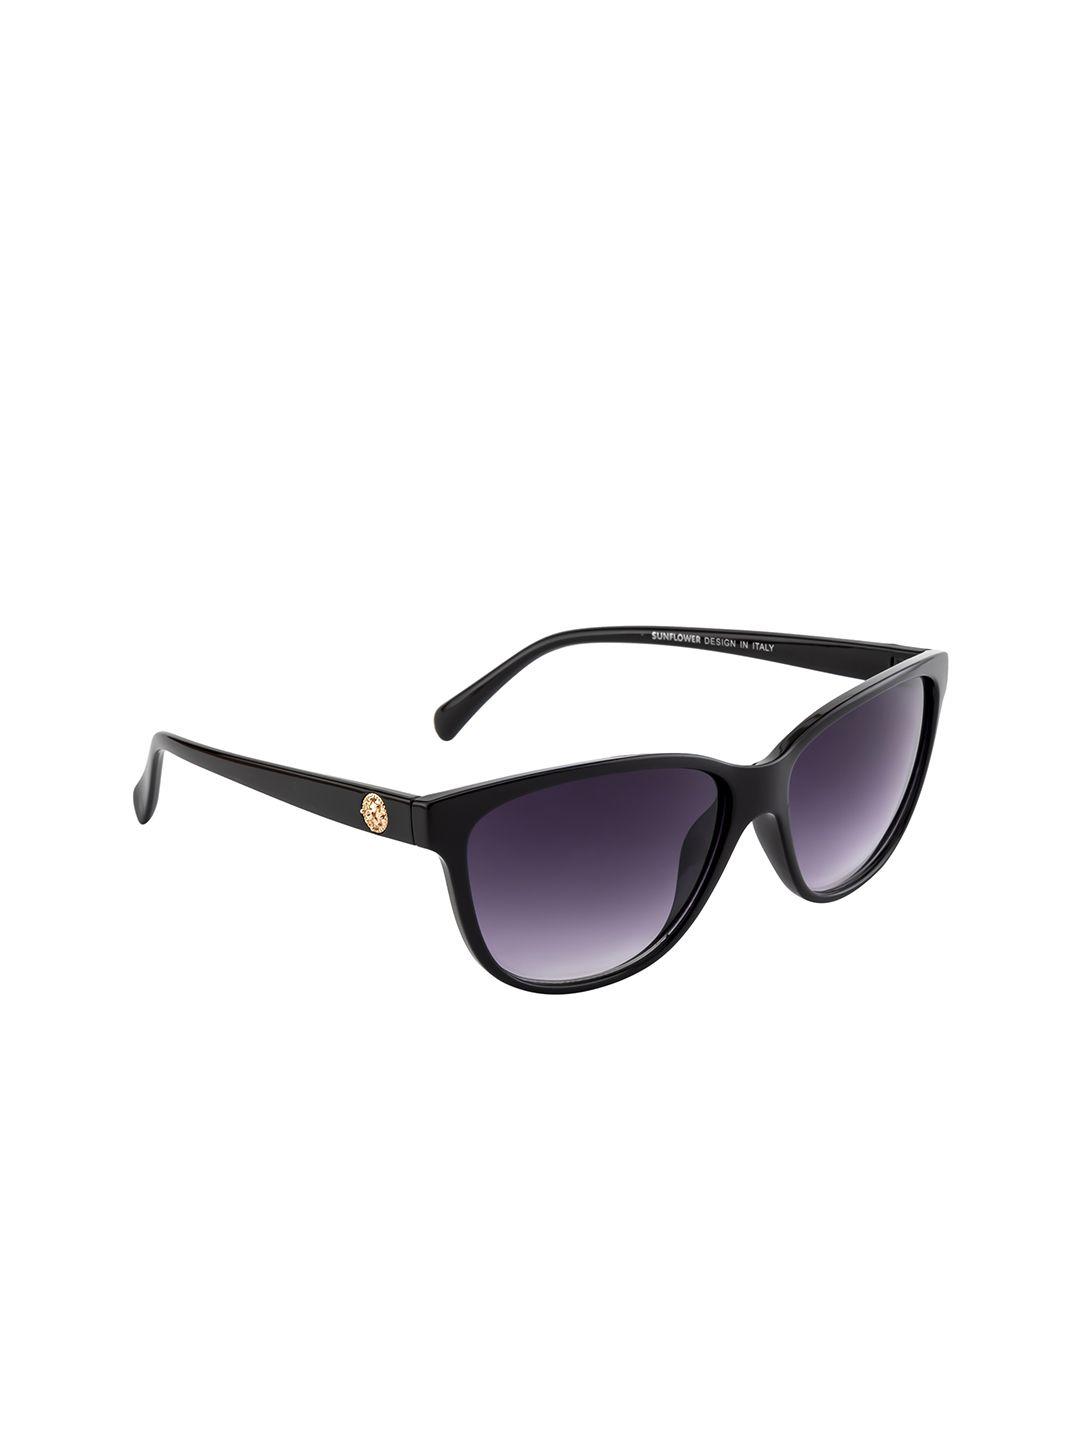 dressberry grey lens & black rectangle sunglasses with uv protected lens